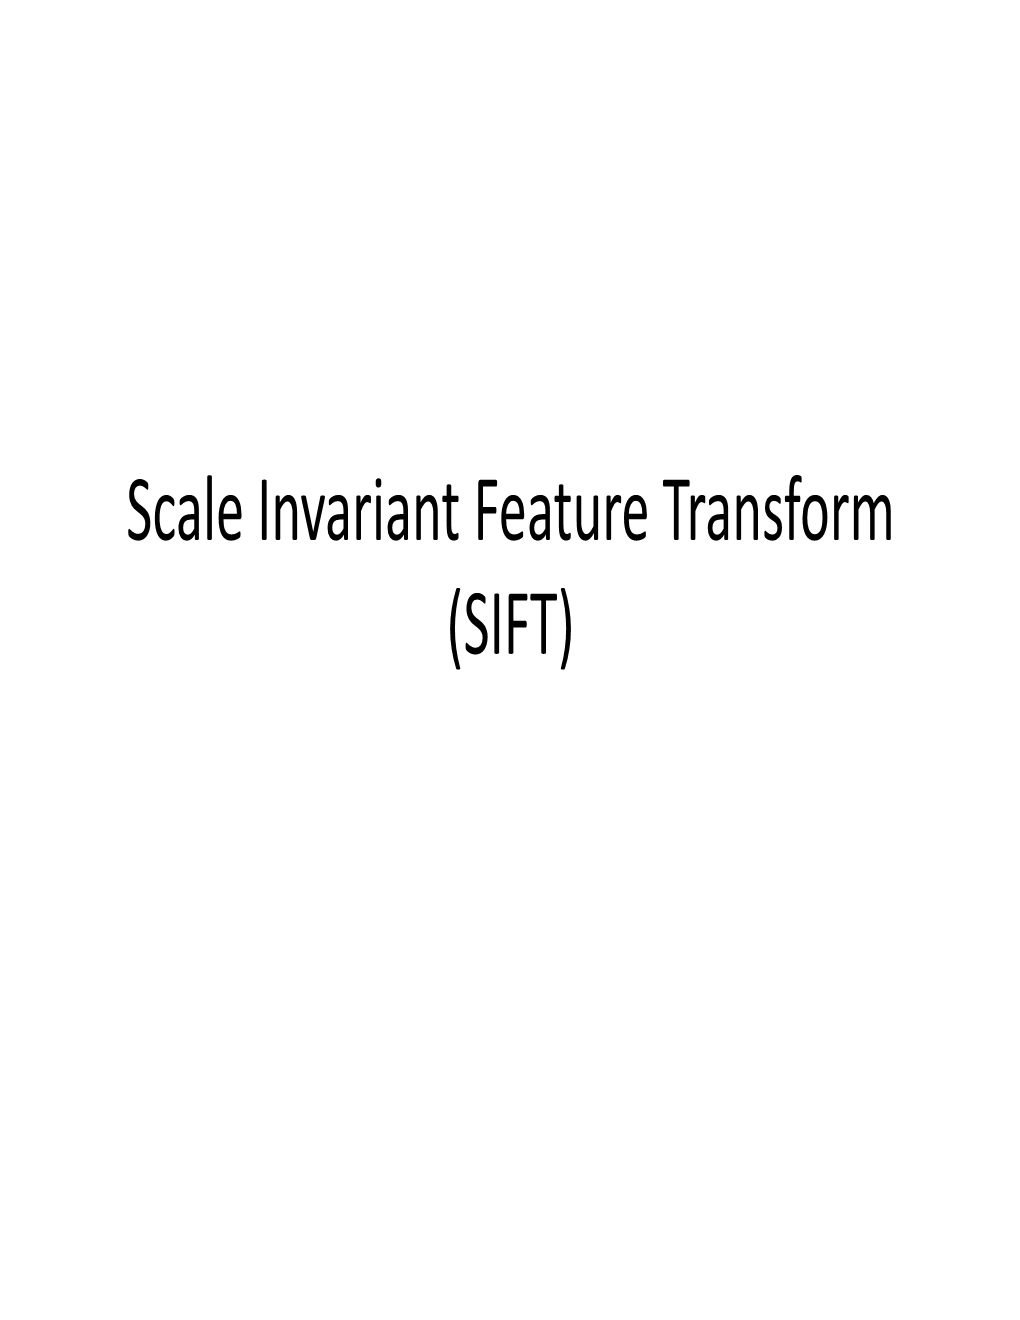 Scale Invariant Feature Transform (SIFT) Why Do We Care About Matching Features?